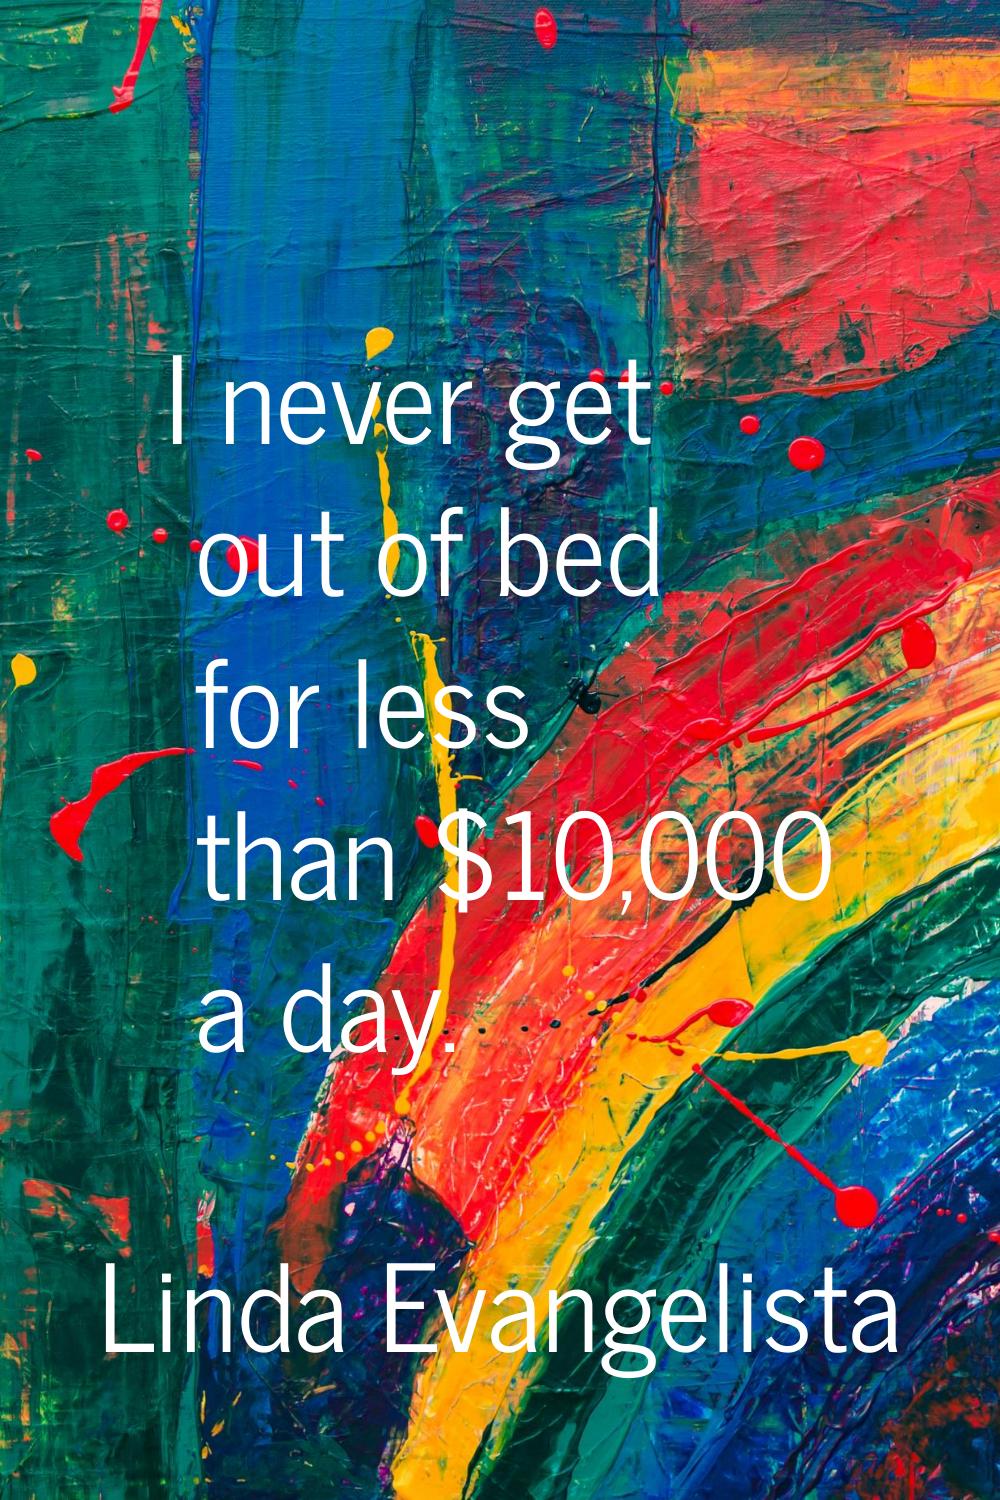 I never get out of bed for less than $10,000 a day.